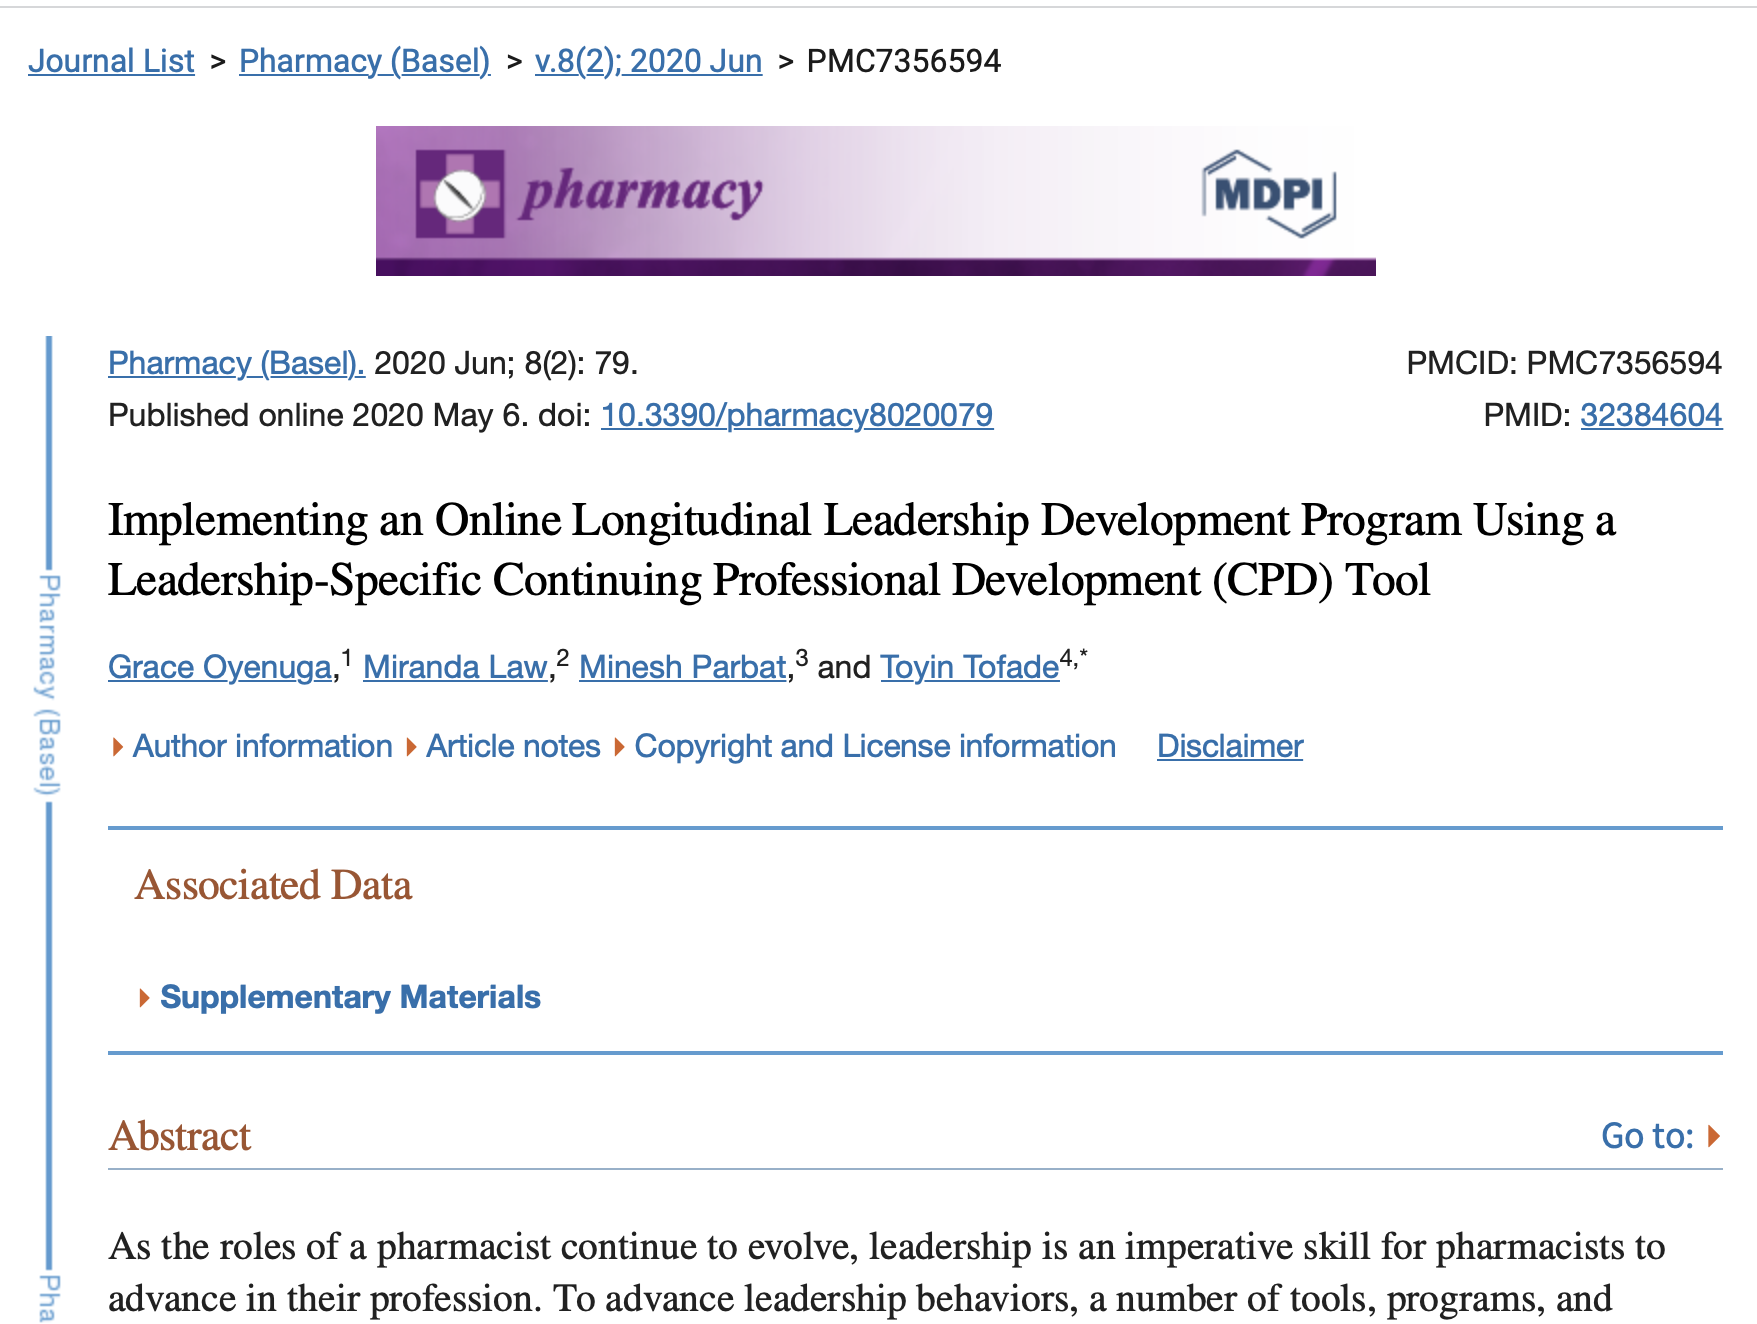 Implementing an Online Longitudinal Leadership Development Program Using a Leadership-Specific Continuing Professional Development (CPD) Tool (2020) Thumbnail